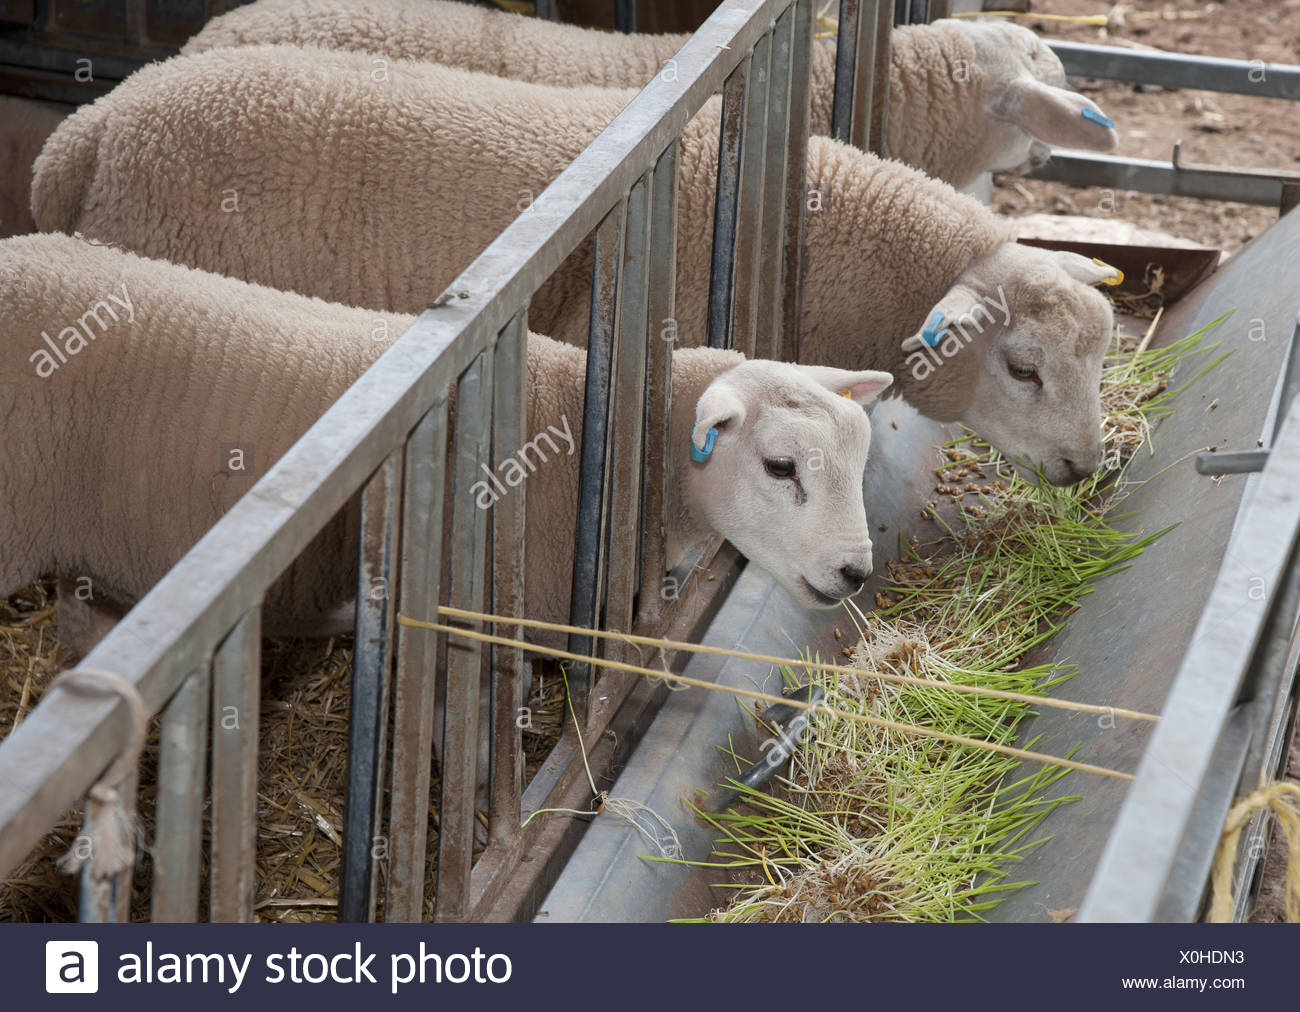 Domestic Sheep Lambs Feeding On Barley Hordeum Vulgare Hydroponic Growing System Crop Of Sprouted Seedlings At